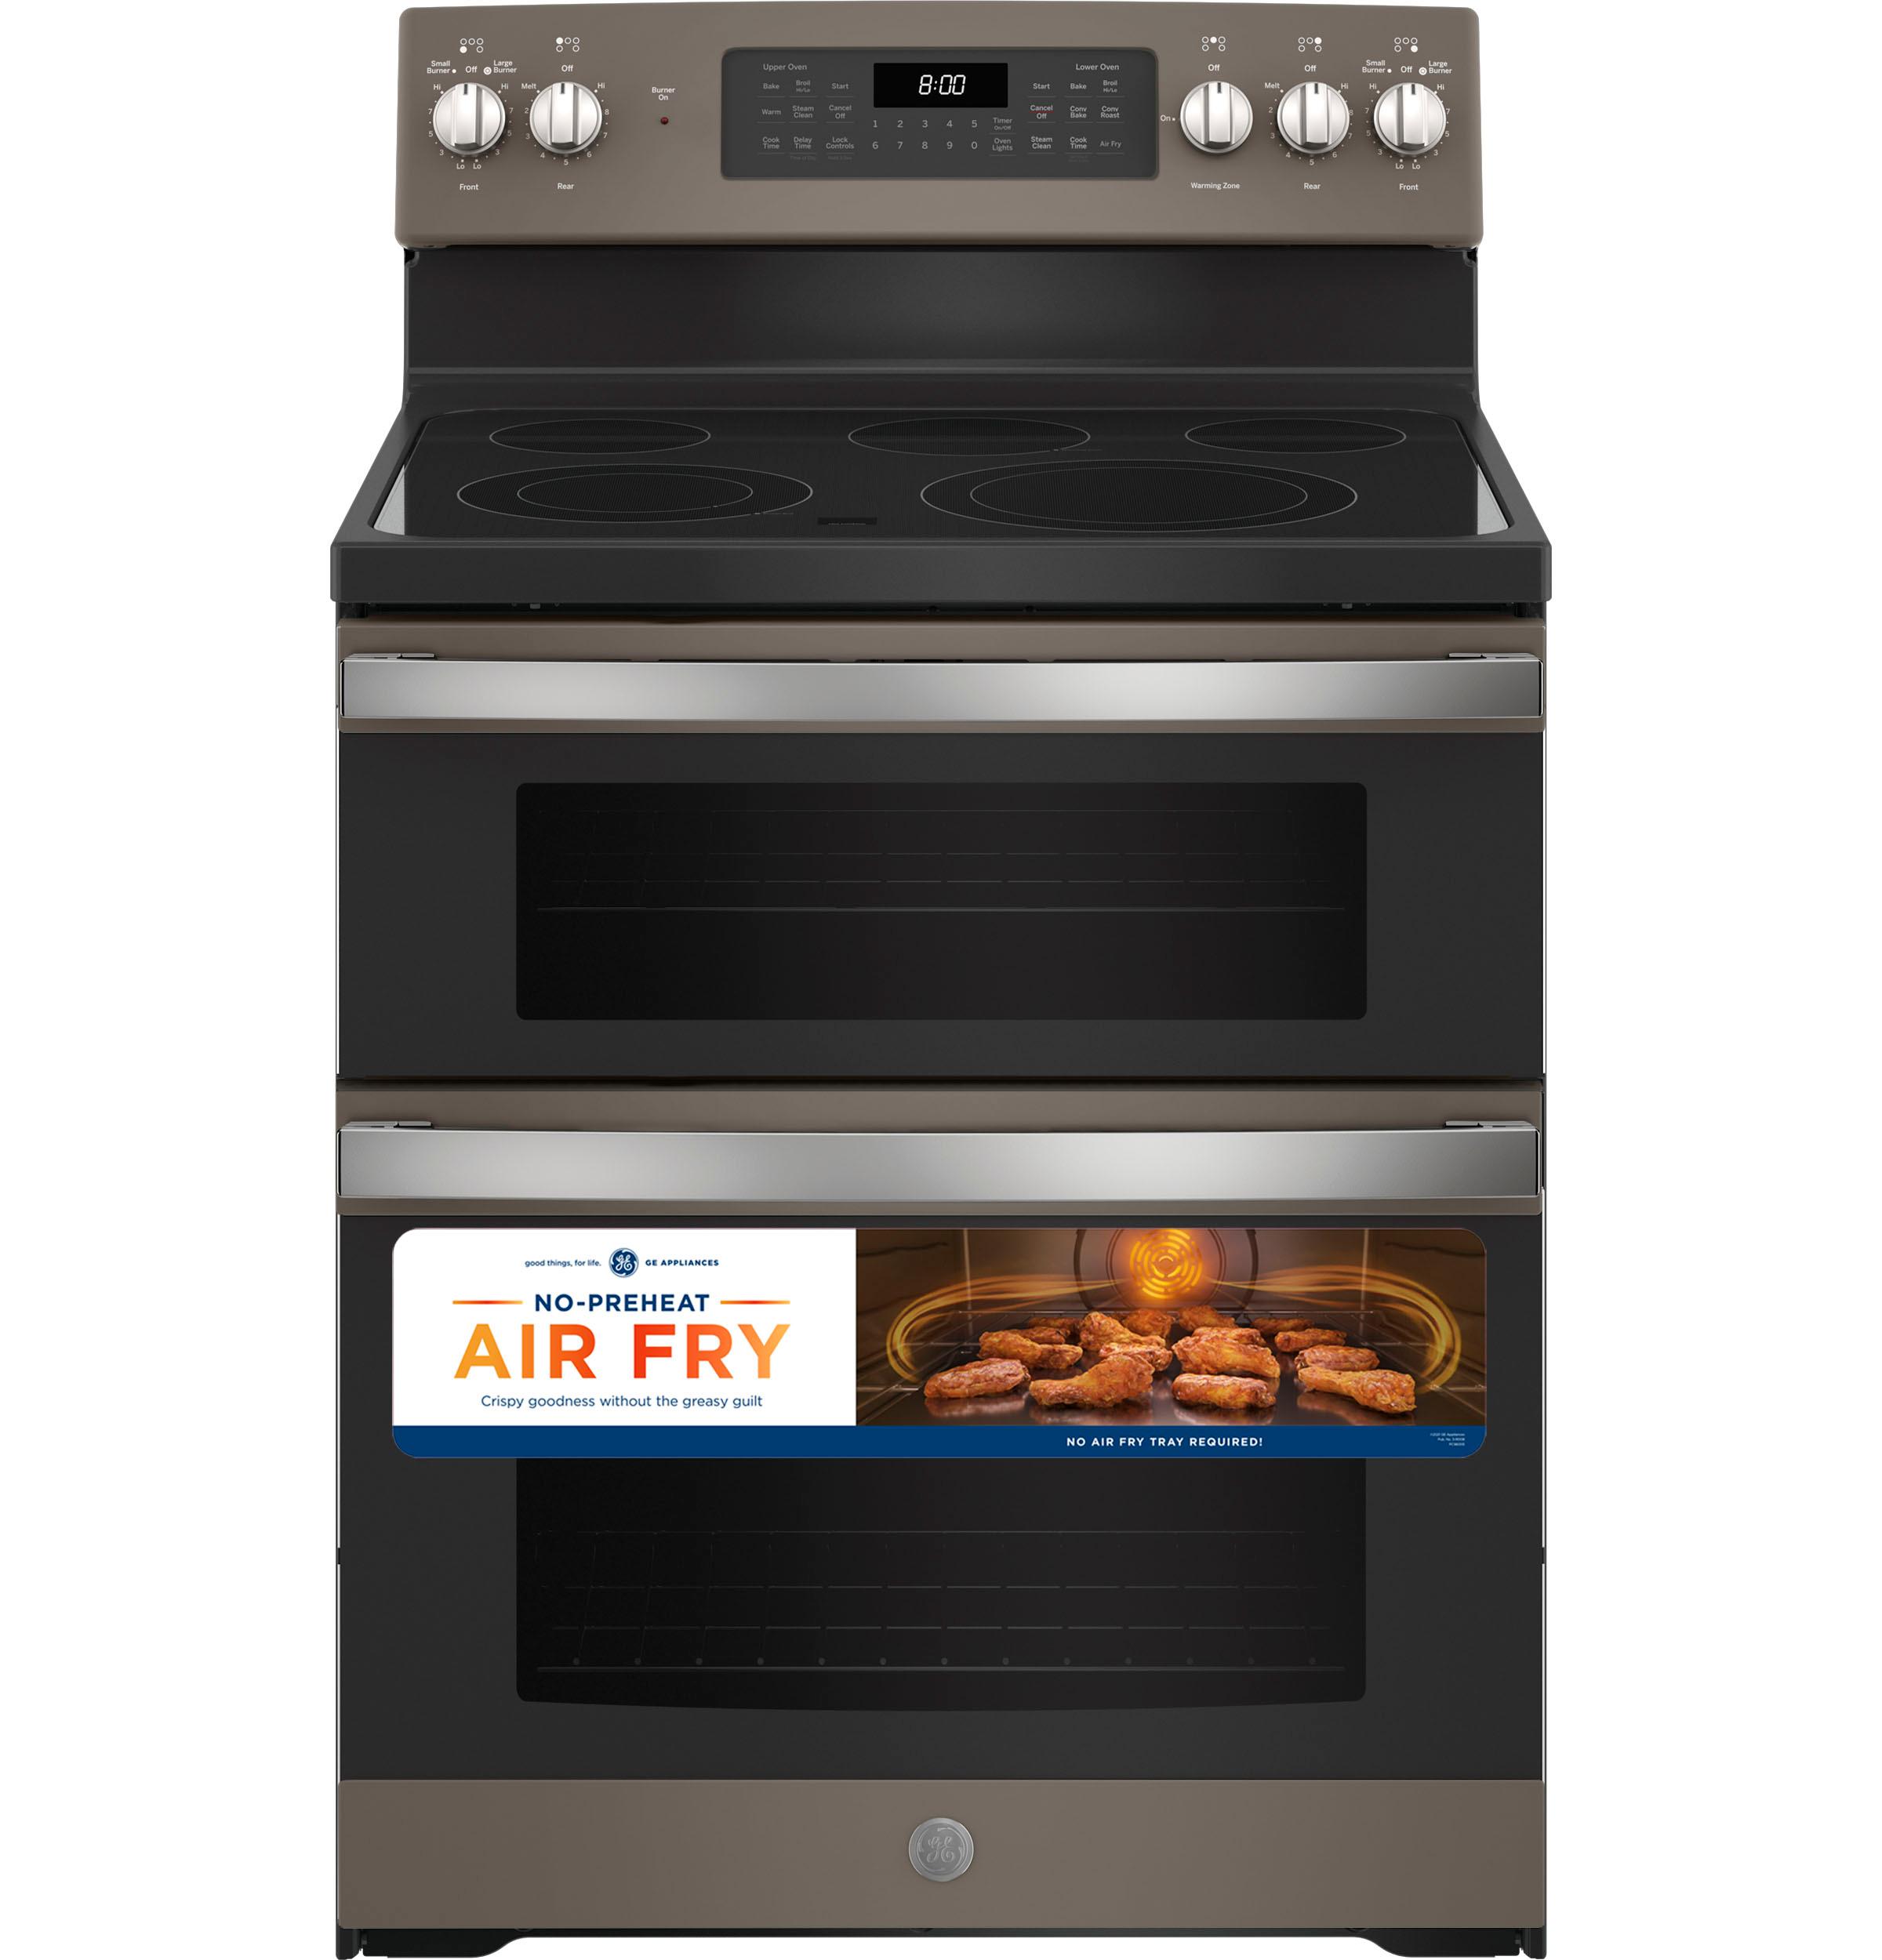 GE® 30" Free-Standing Electric Double Oven Convection Range